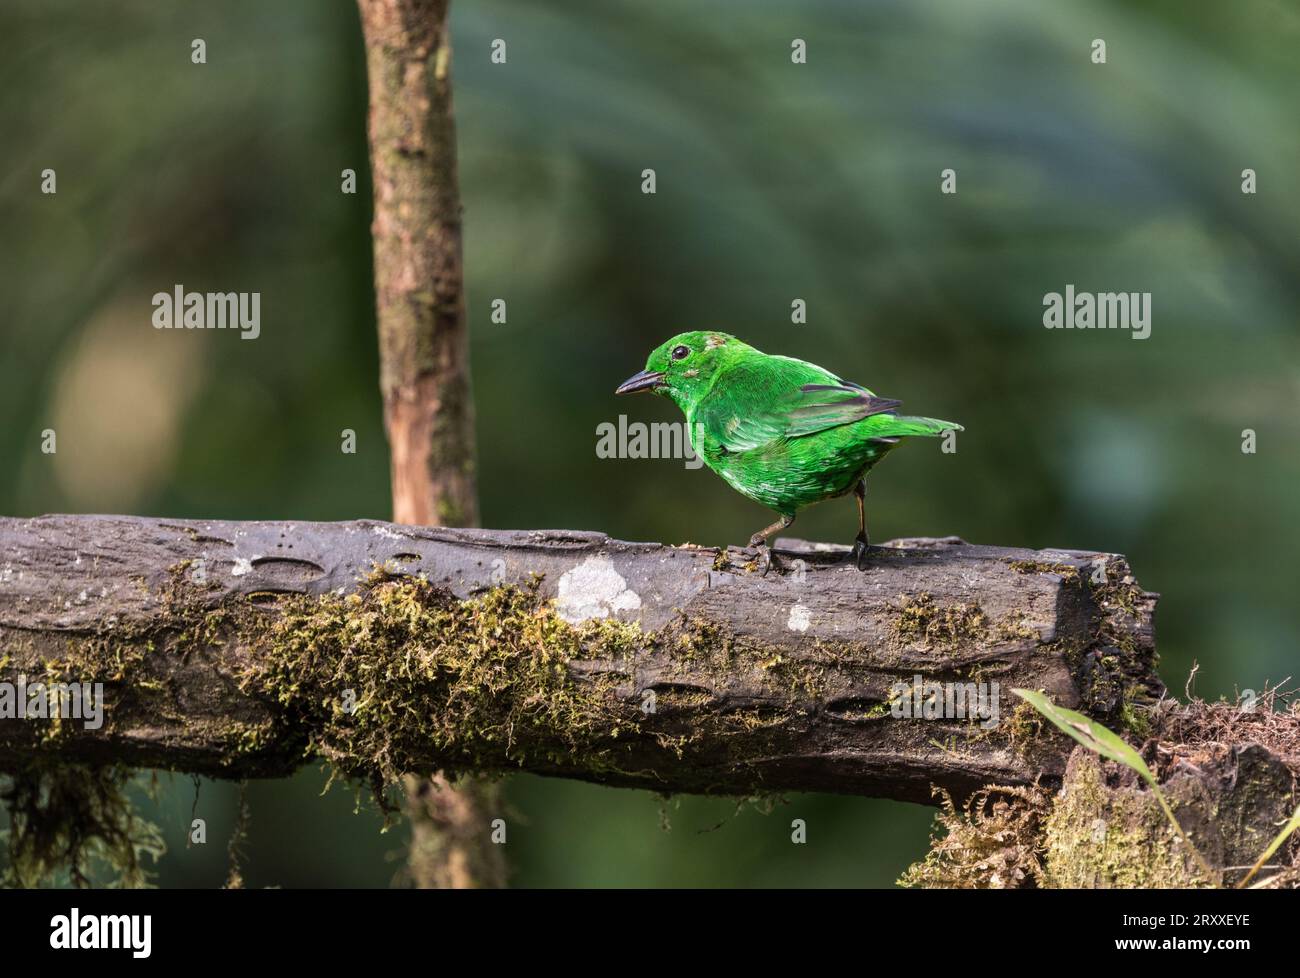 Foraging glistening Green Tanager (Chlorochrysa phoenicotis), un Chaco endemico, in Ecuador Foto Stock